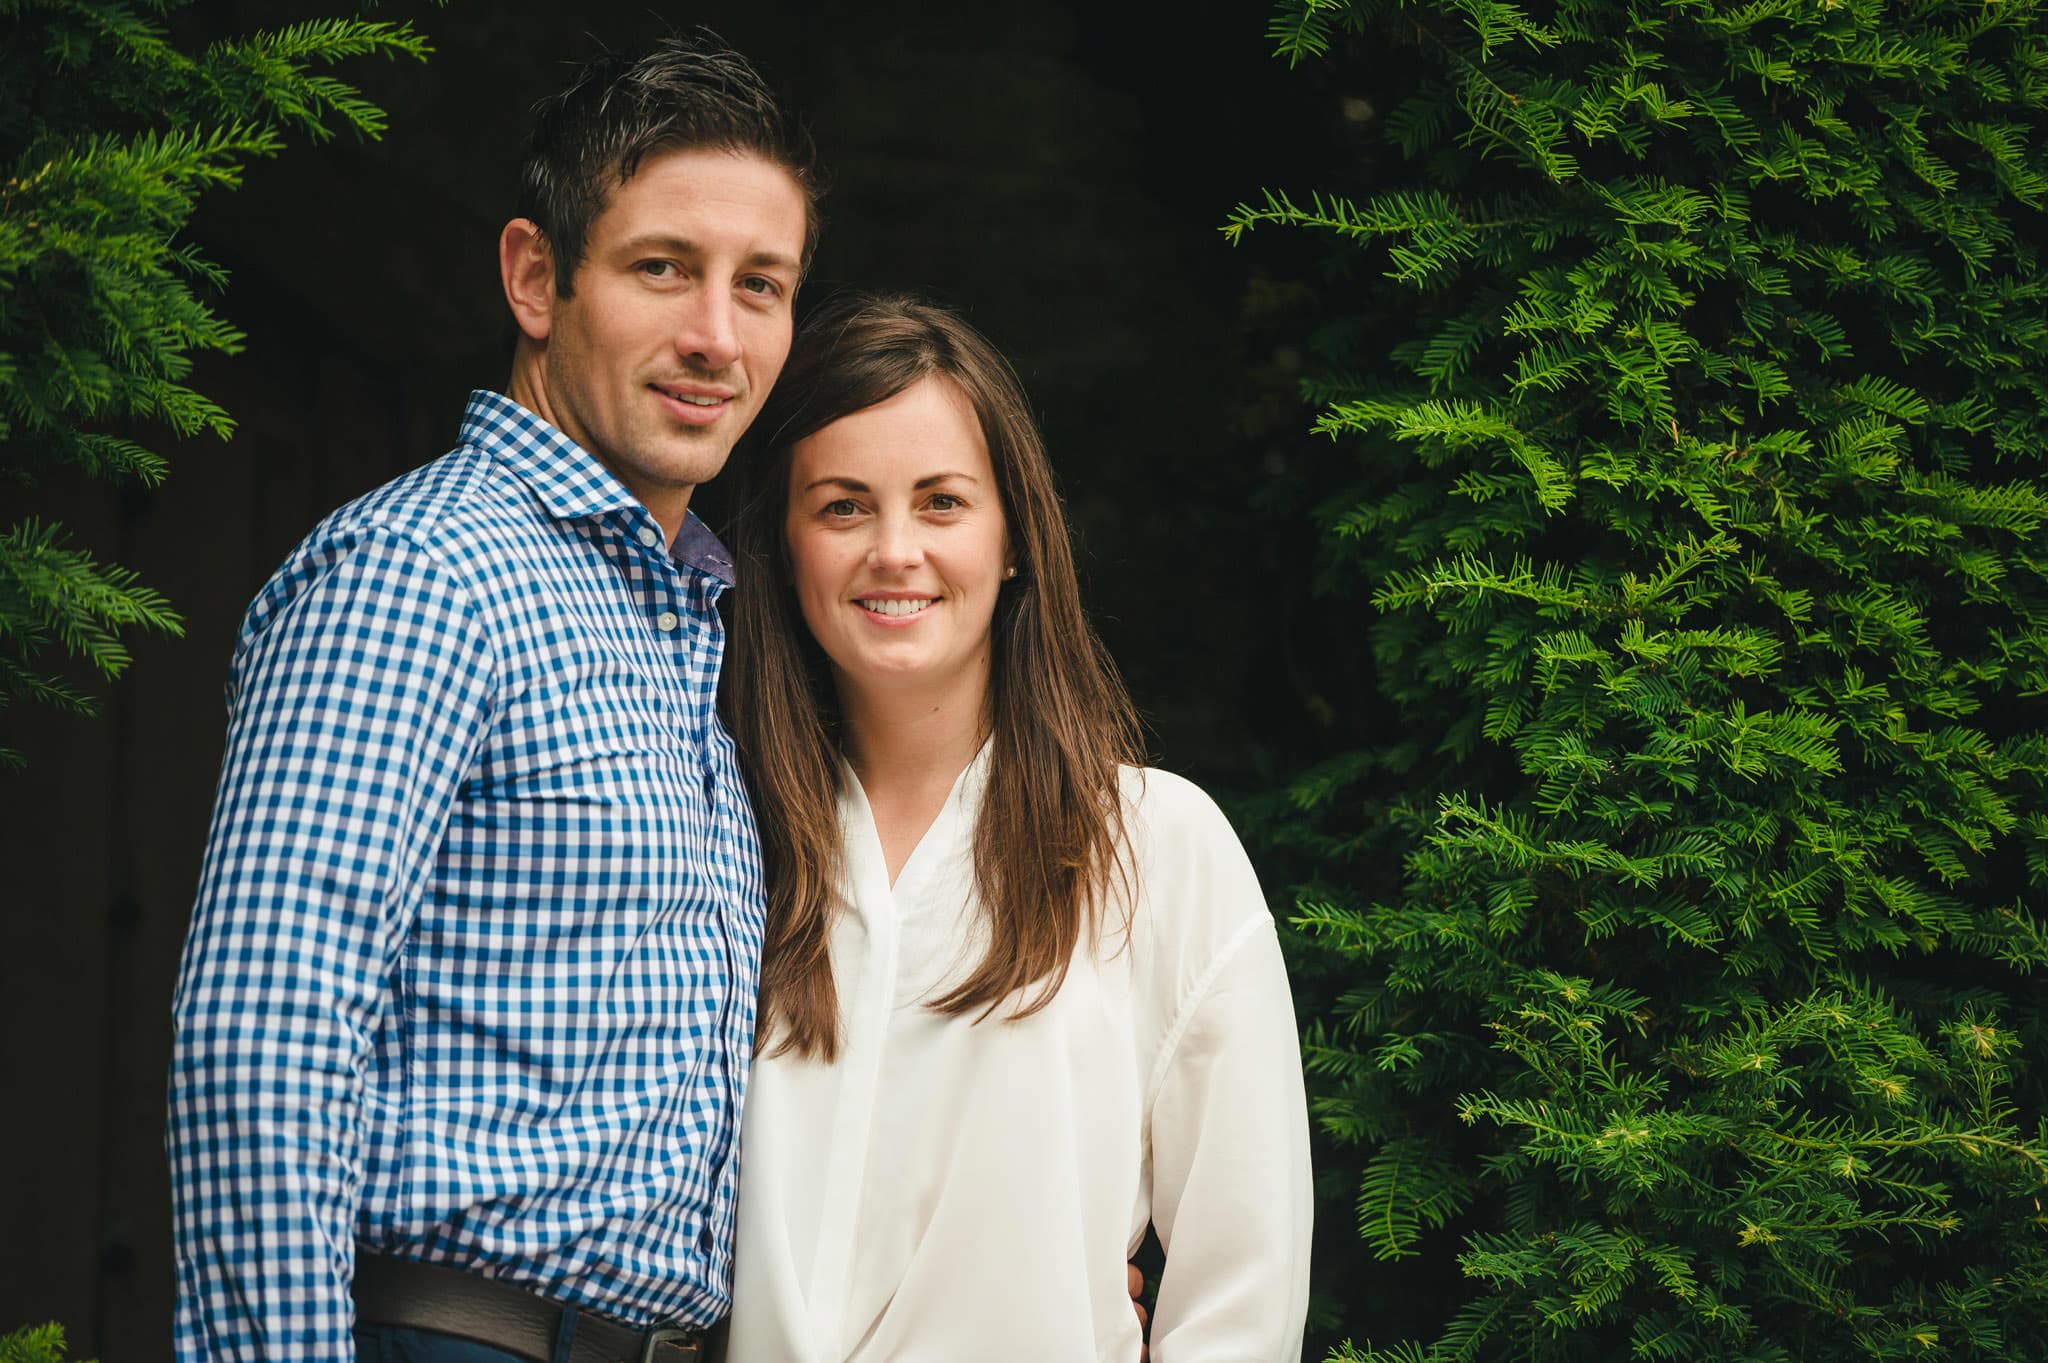 Dean + Sarah's pre wedding photography session in Herefordshire, West Midlands 25